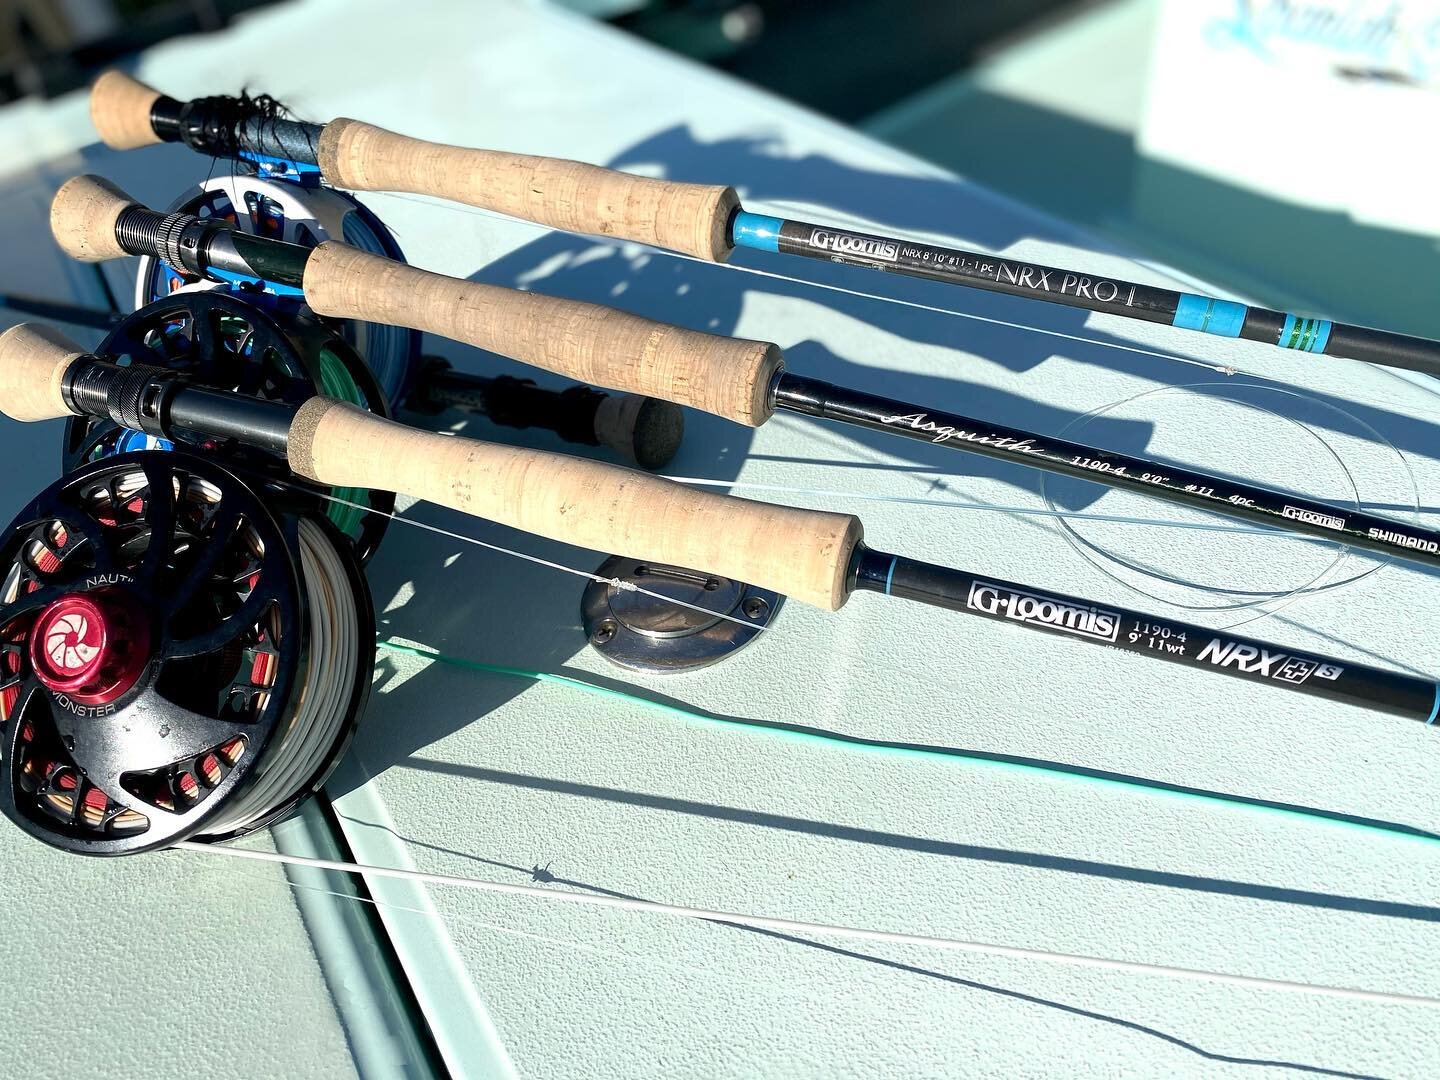 Ready and waiting to break out the big guns, weapons of choice for sea monsters. 
Naplesfloridaflyfishing.com
AnglersAddictionGuideSvc
#flyfishingguide #sightcasting #saltwaterflyfishing #tarpon #gloomisfly #nrxplus #nrx #asquith #proone #monster #na